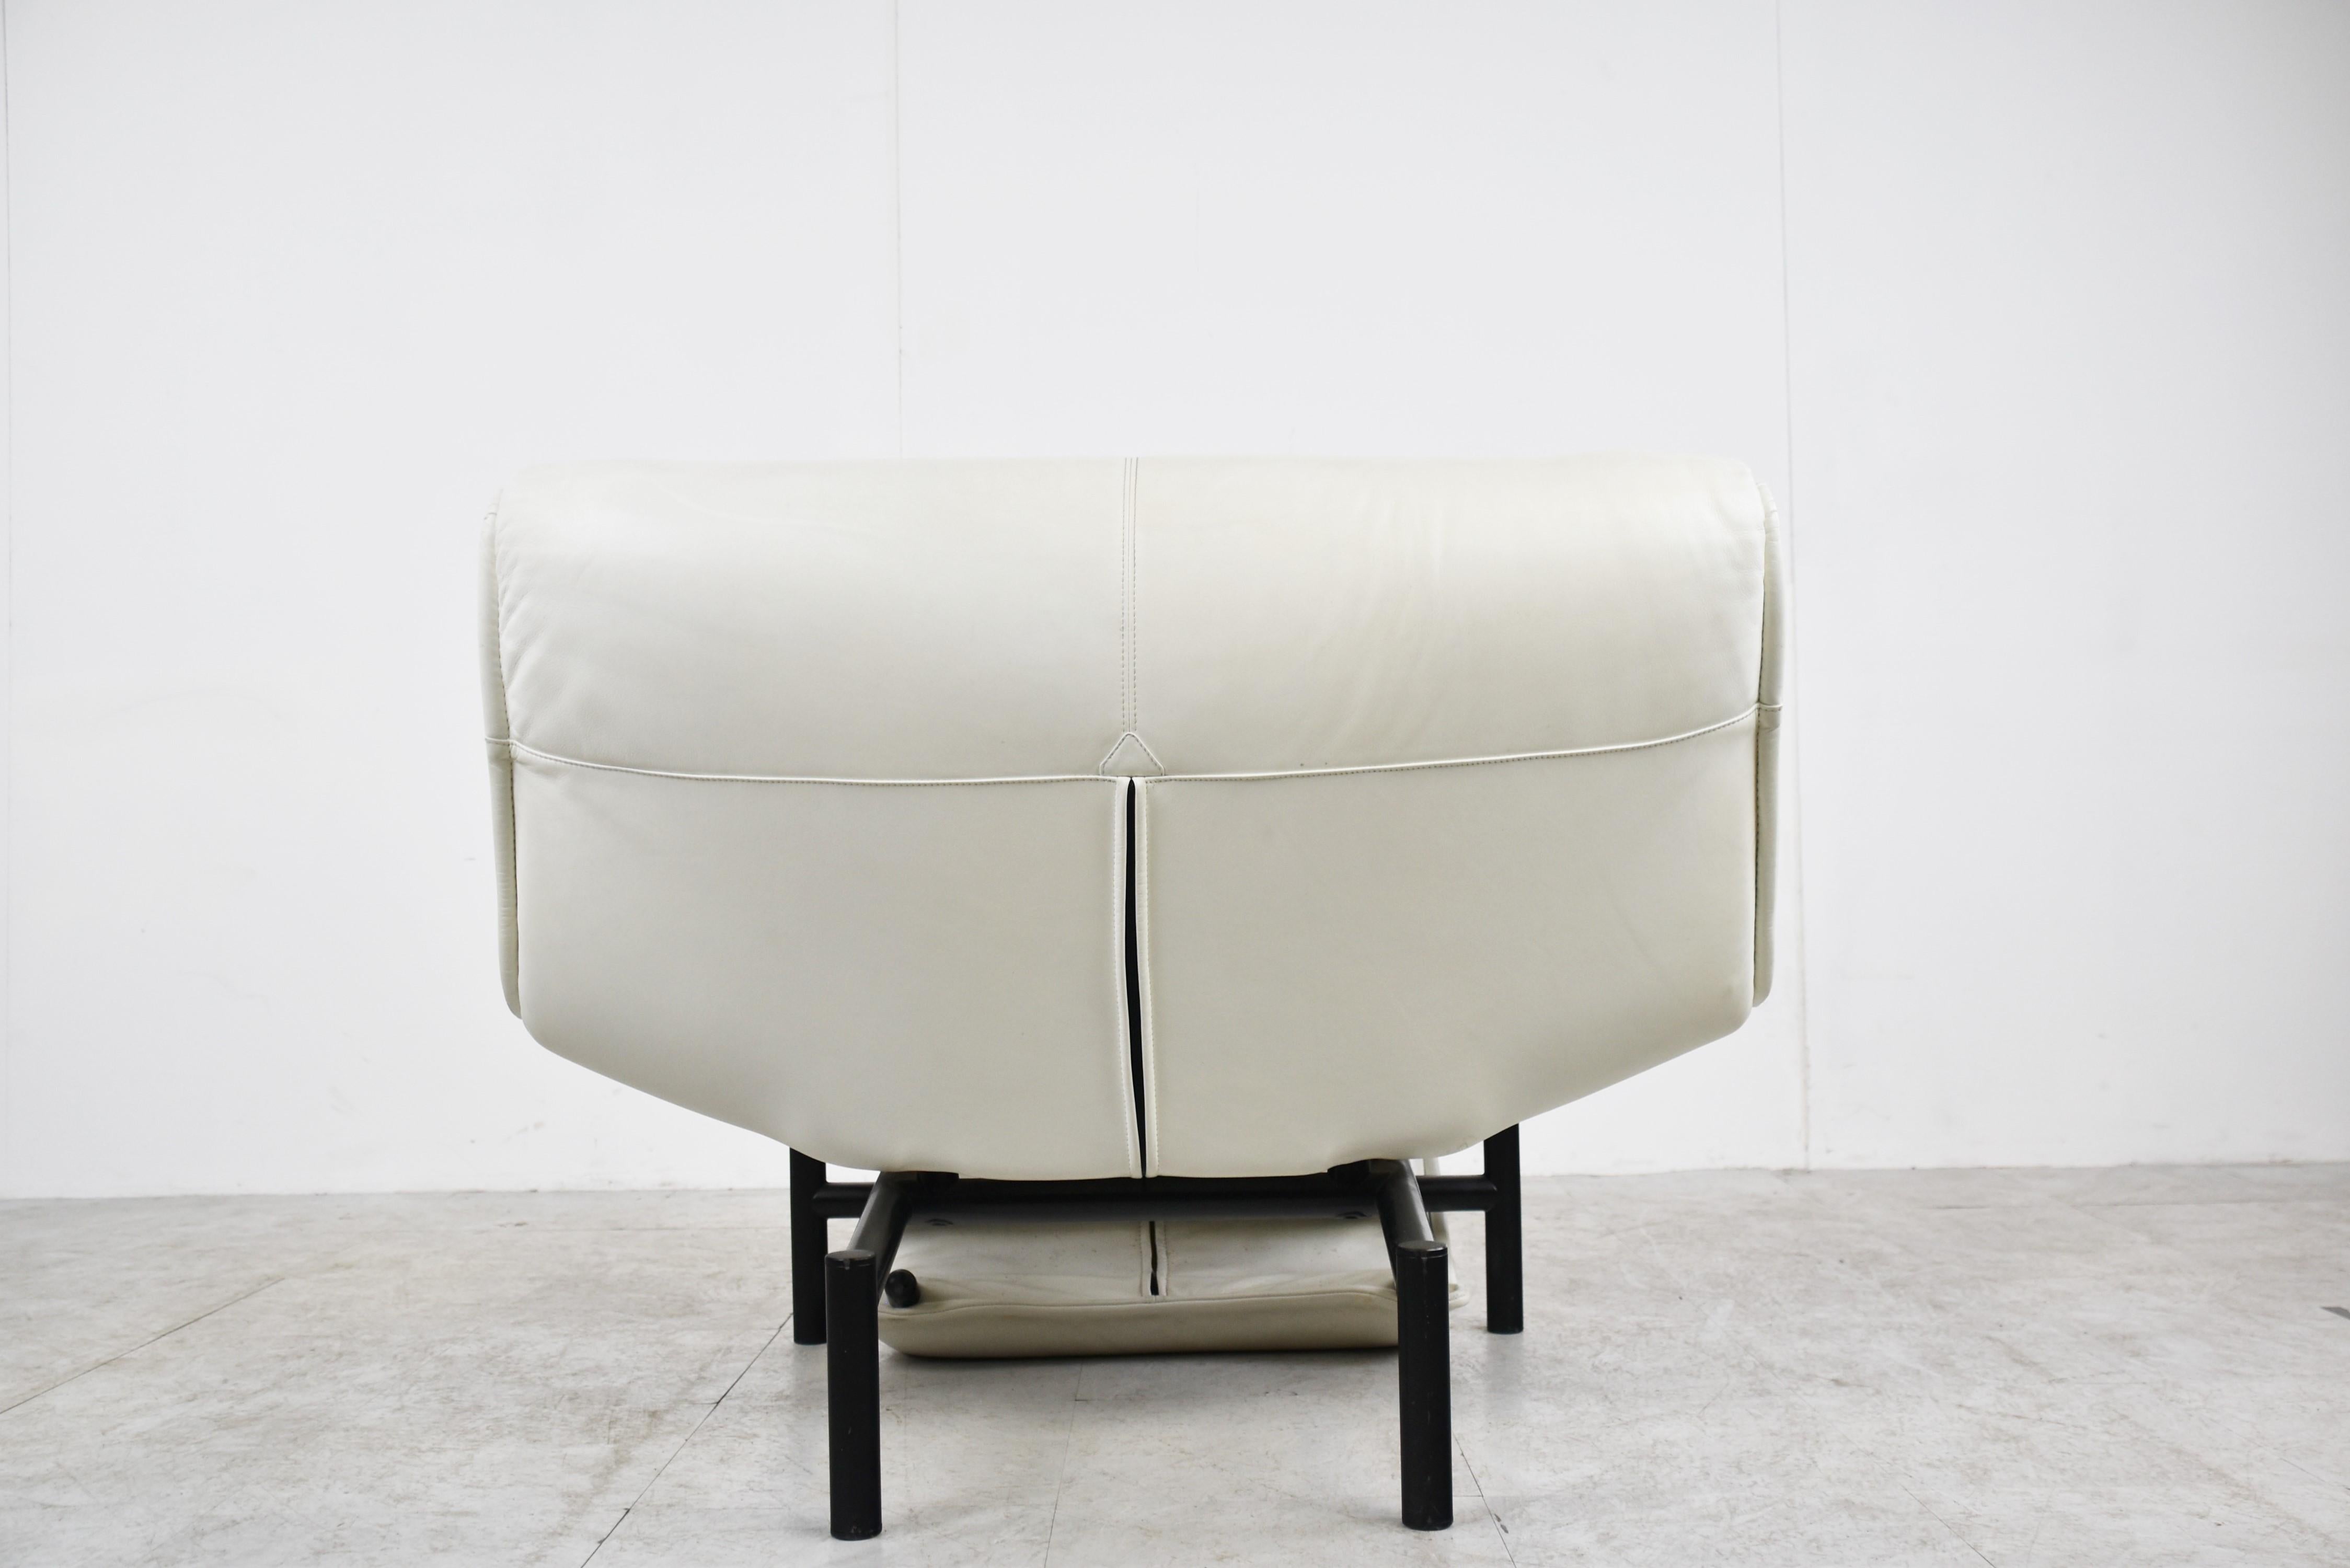 Vintage Leather Veranda Lounge Chair by Vico Magistretti for Cassina, 1980s For Sale 3